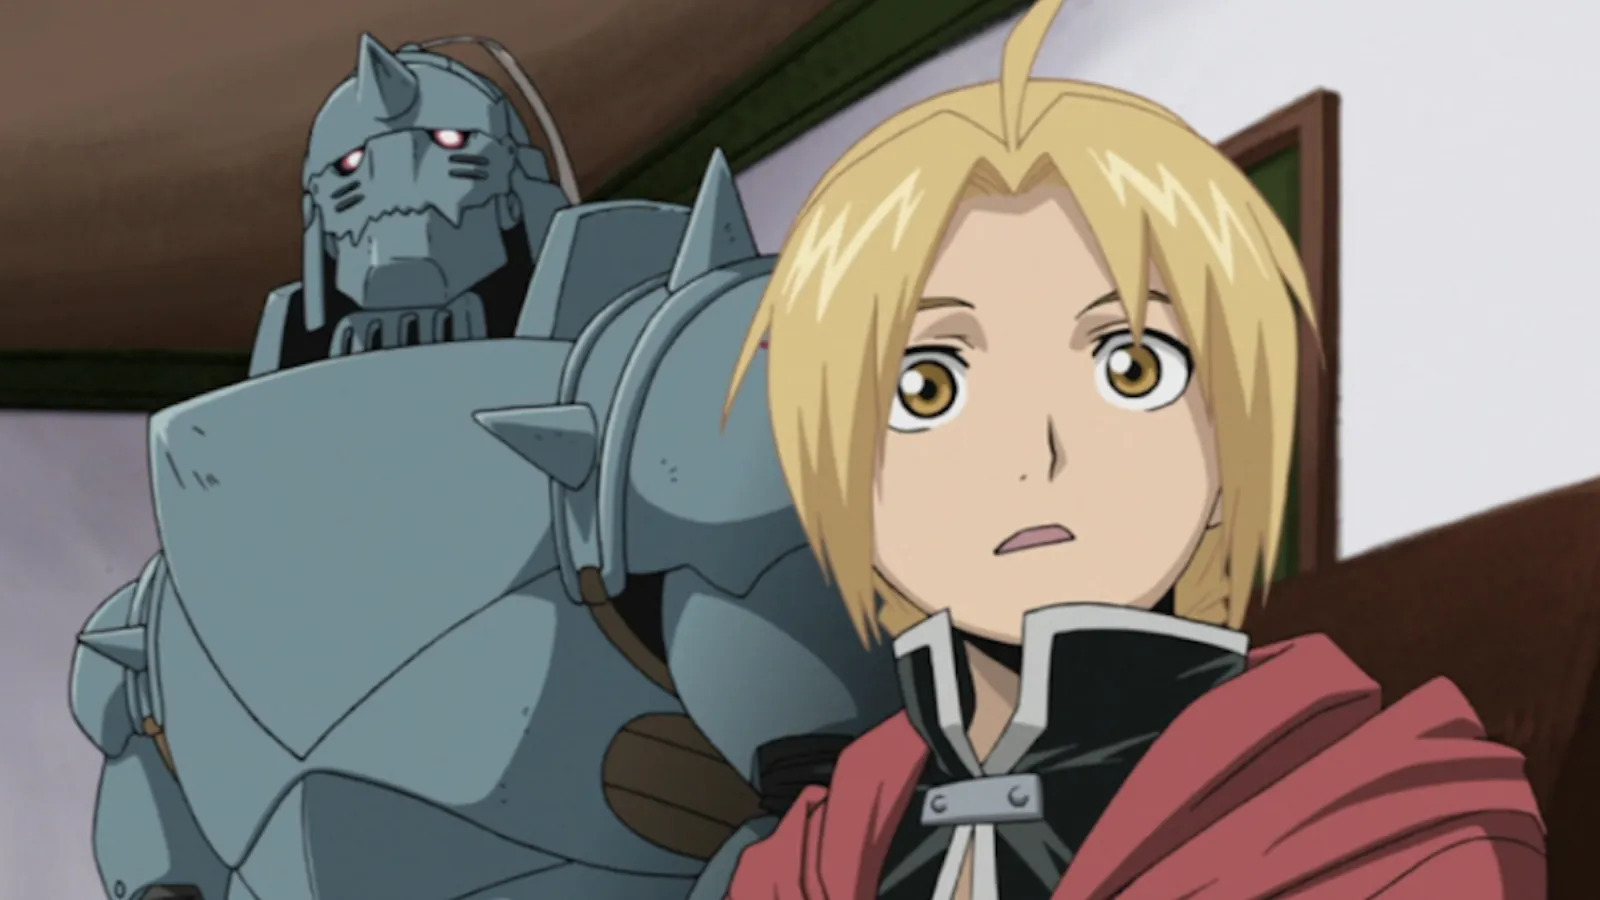 Finished FMA: Brotherhood around 4 months ago. A friend told me to